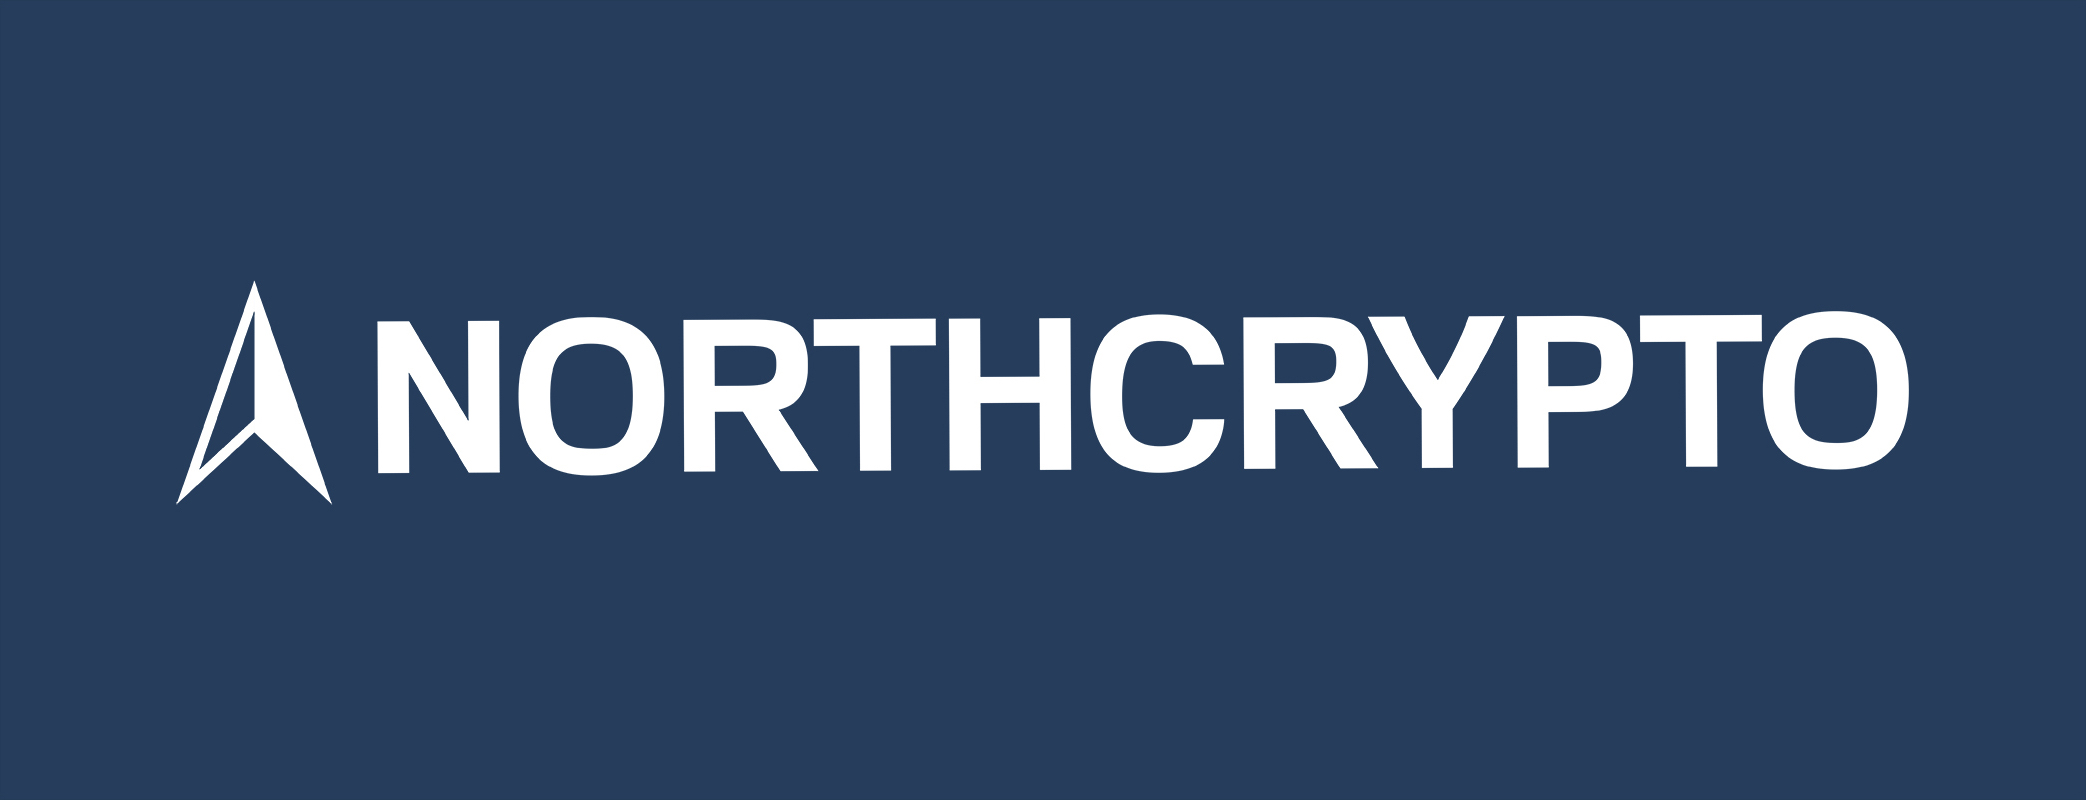 Monthly savings are now possible at Northcrypto